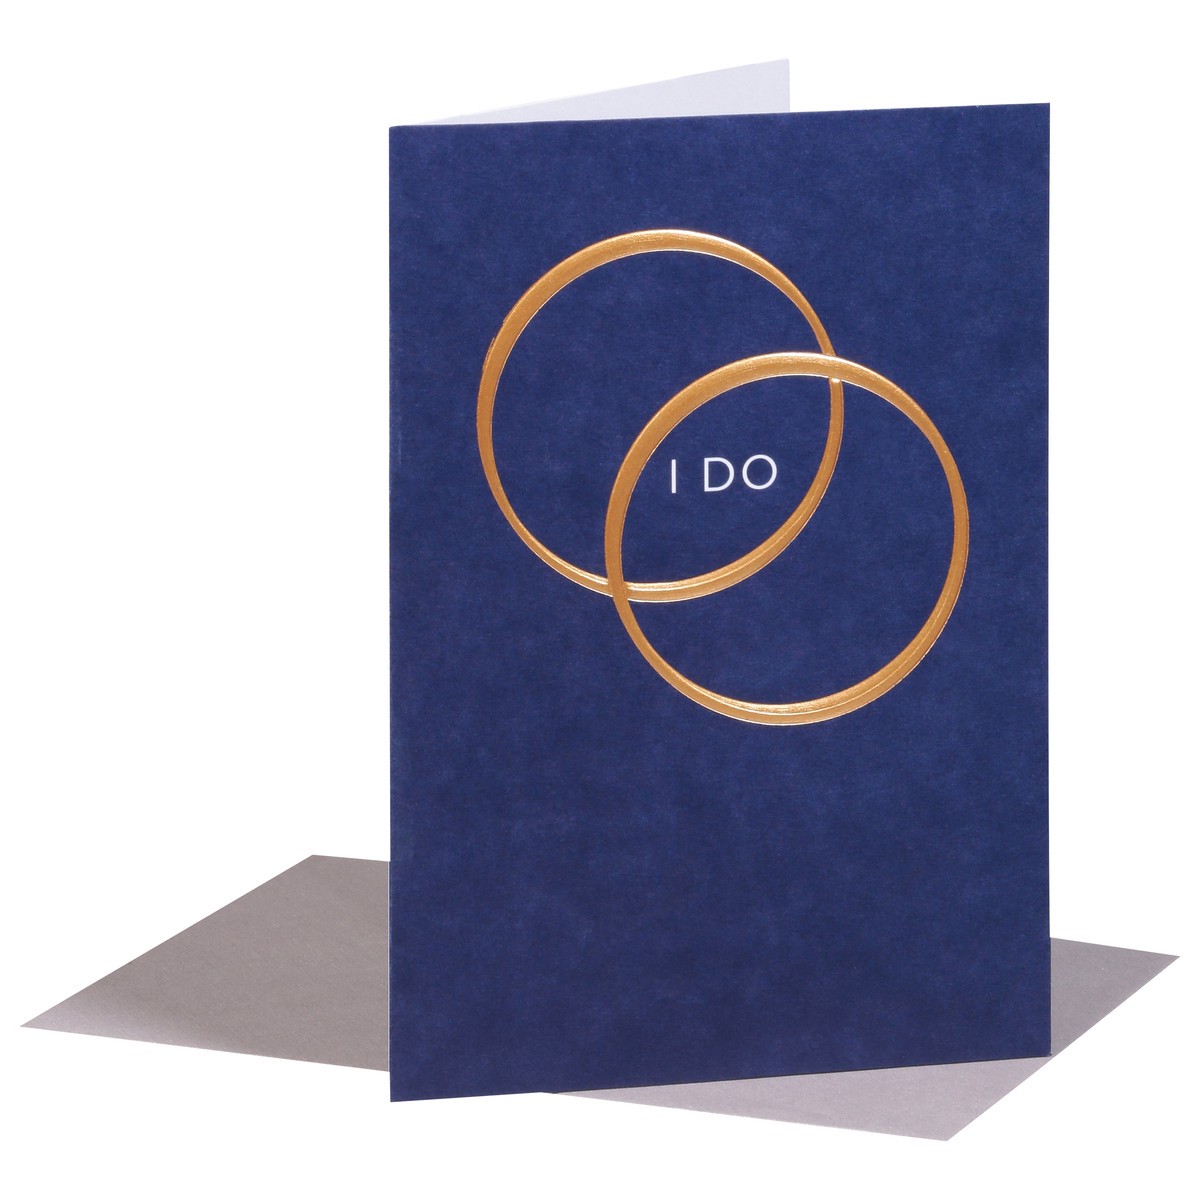 slide 4 of 9, American Greetings Ring in their new lives together with this elegant wedding card. The design features two metallic gold wedding bands on a navy blue background and the words “I DO” on the front. The inside contains simple words of congratulations for the happy couple. It's suitable for sending to any twosome on their happy day. Envelope included., 1 ct